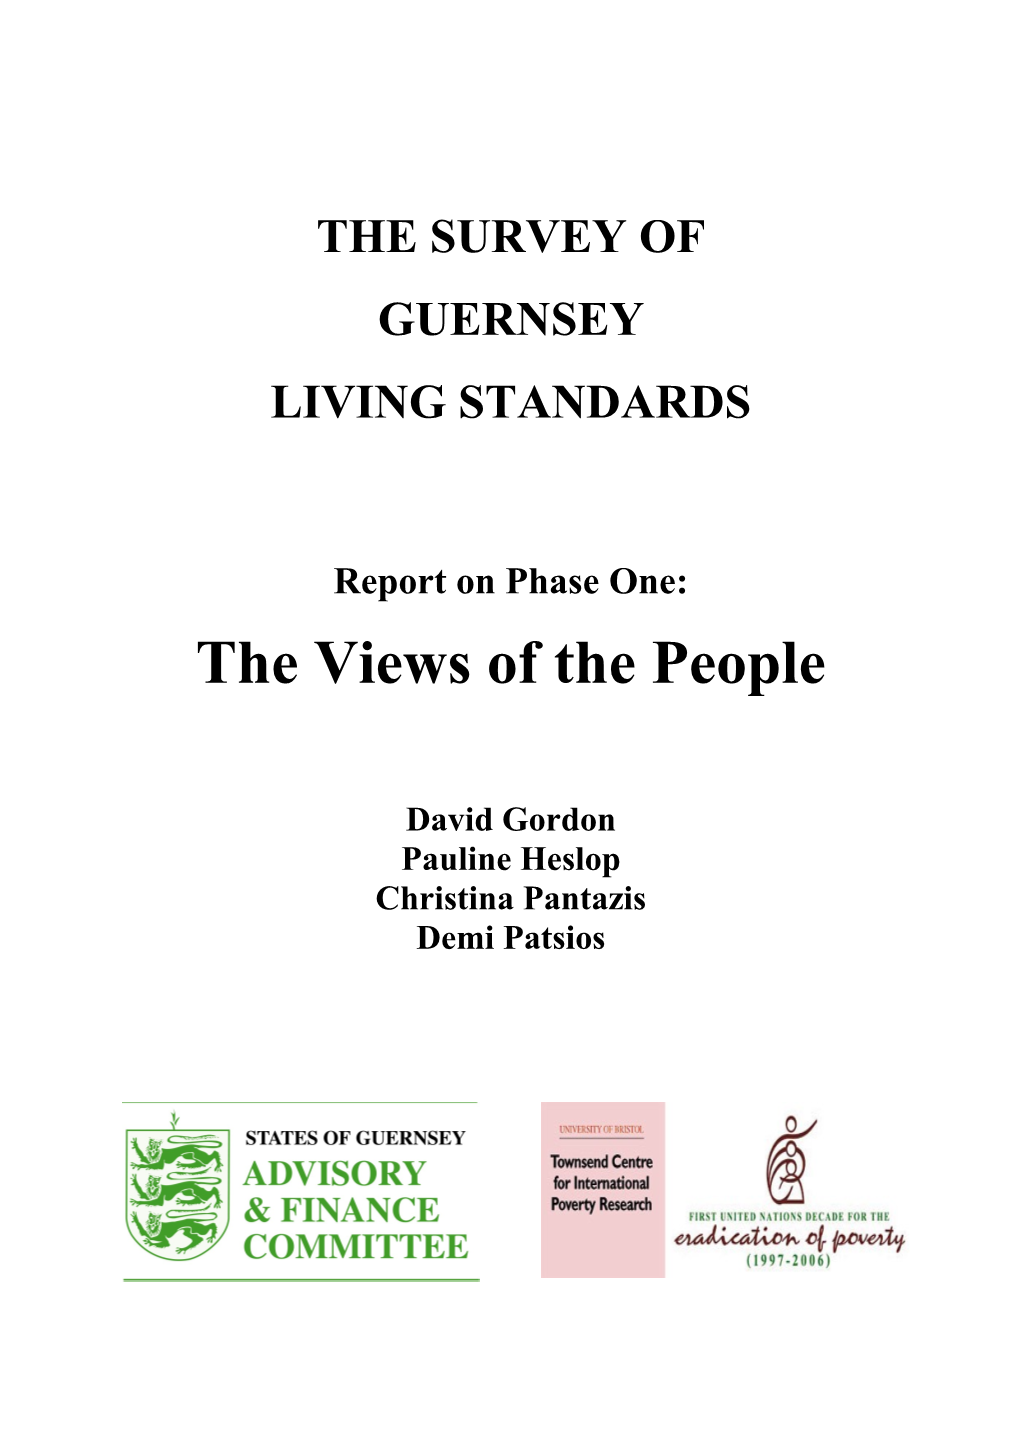 Your Views on How to Improve the Standard of Living on Guernsey